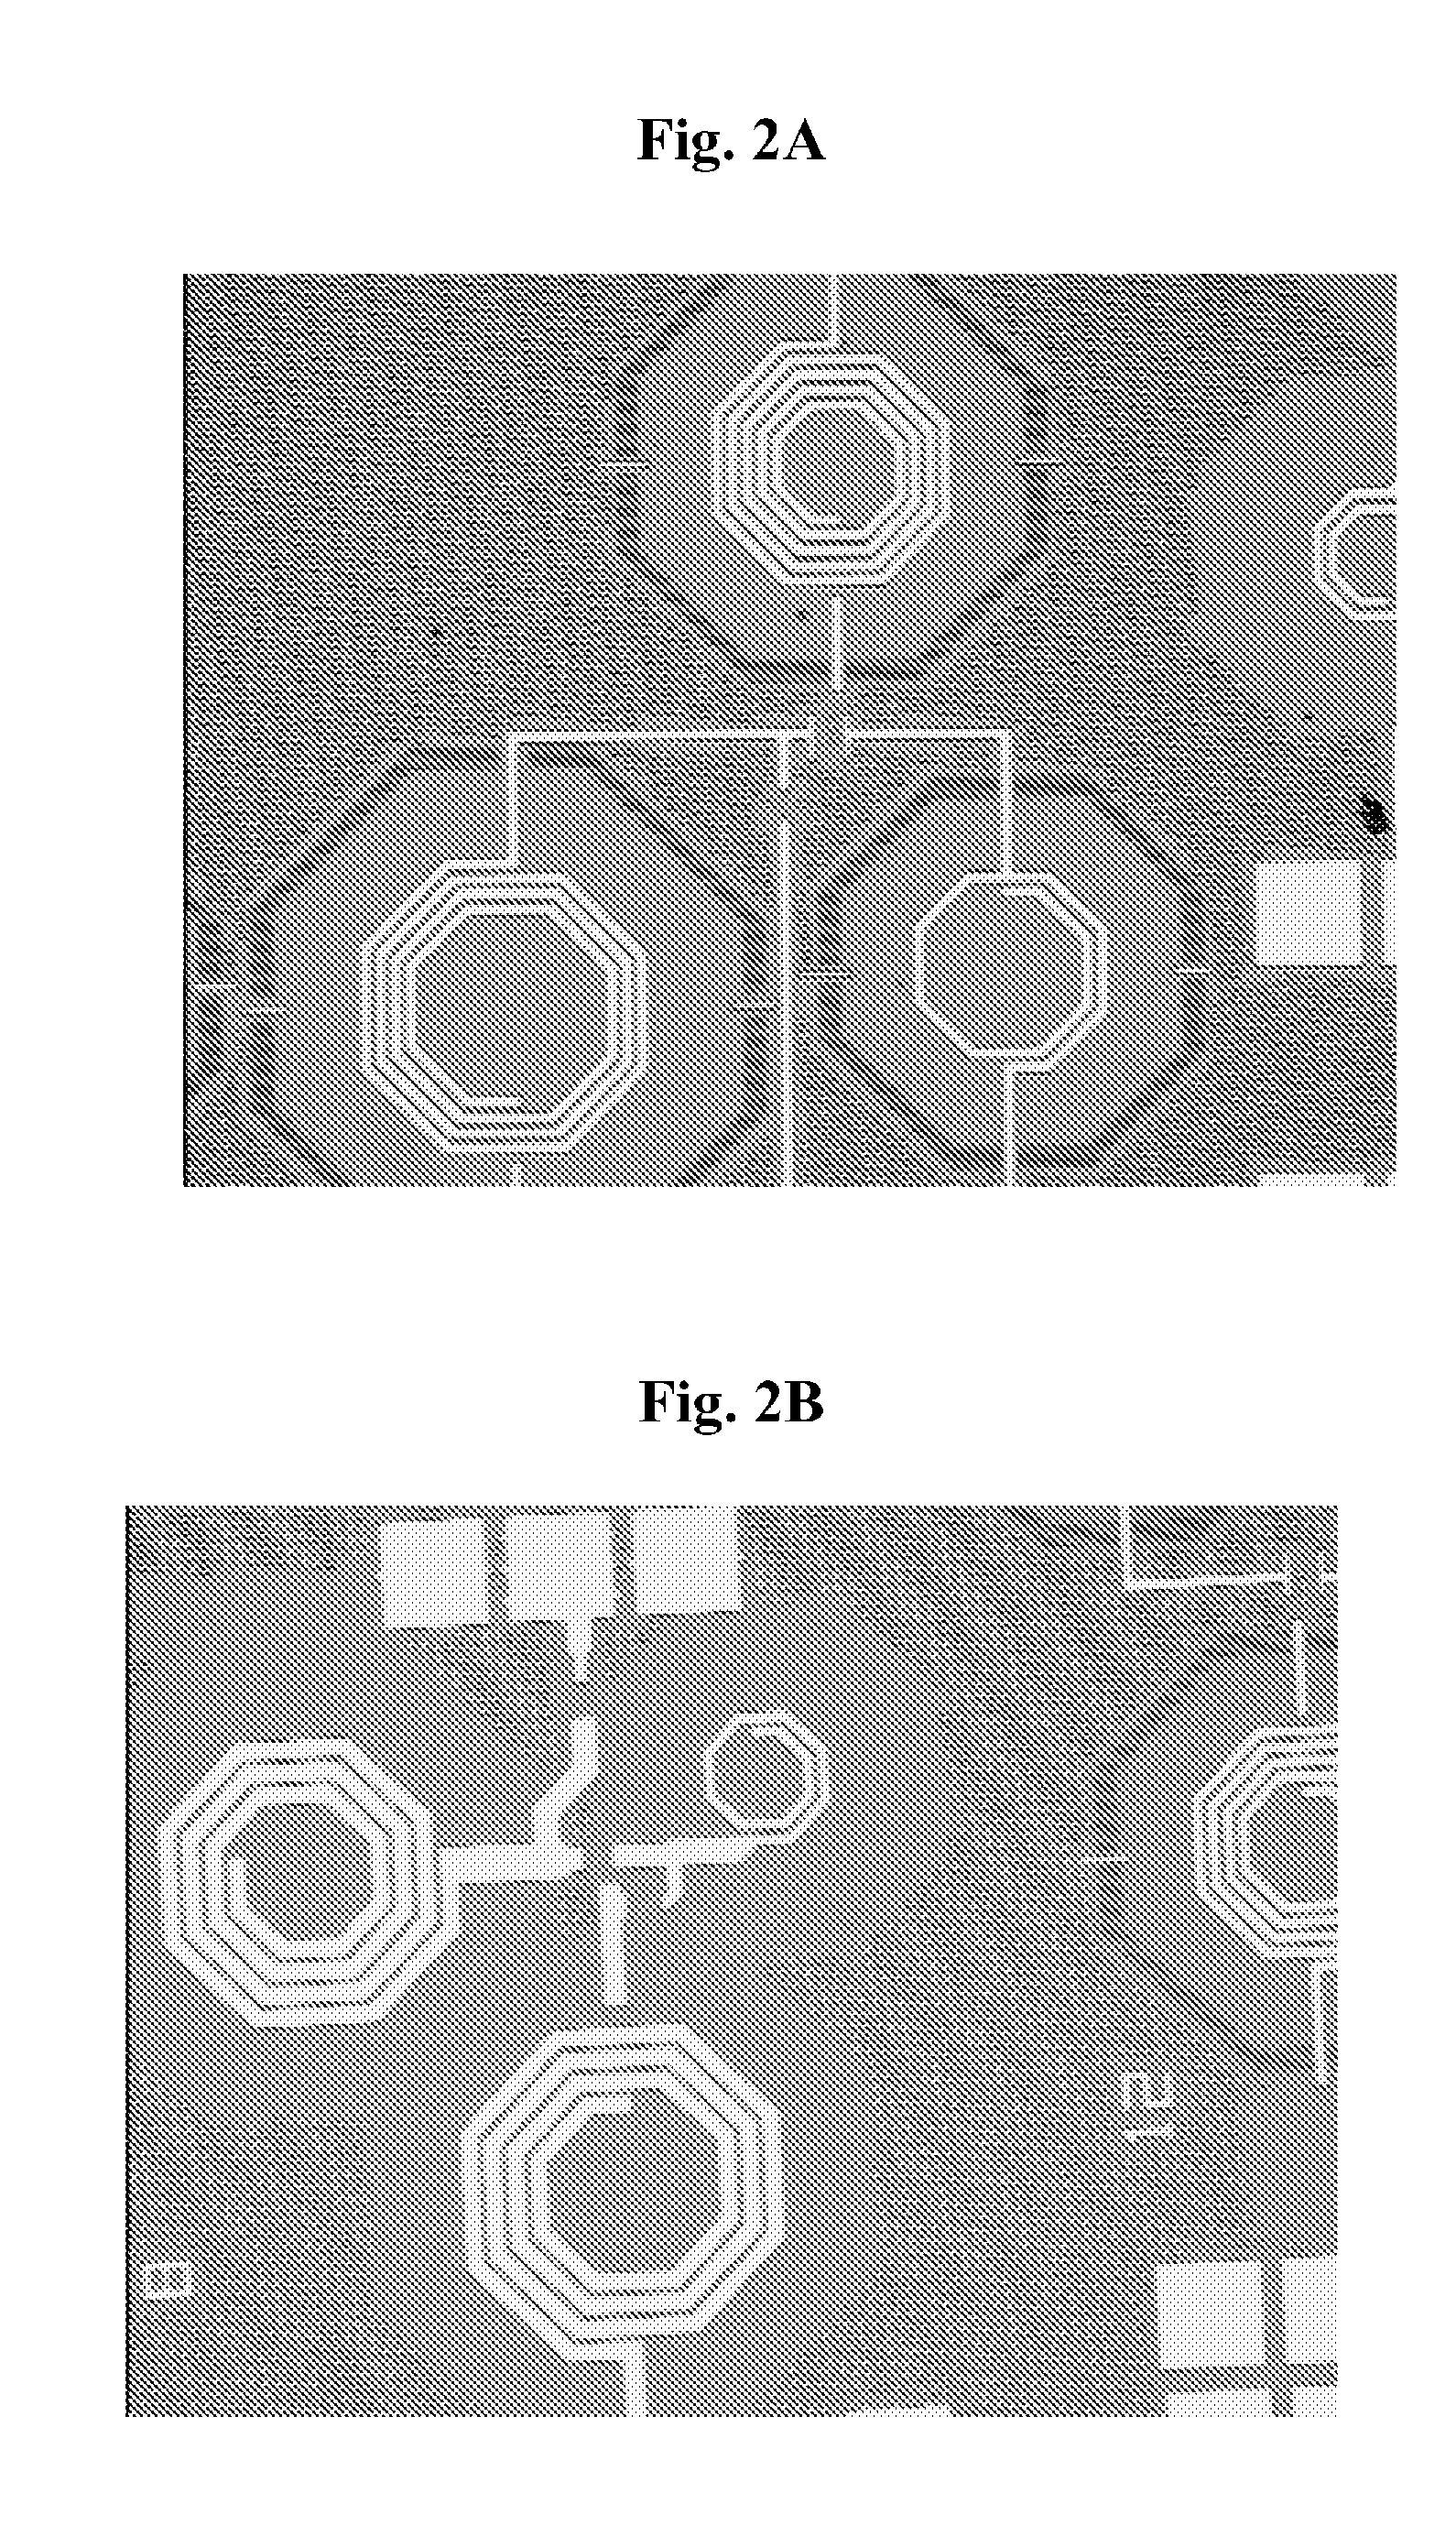 Compositions and method for removing coatings and preparation of surfaces for use in metal finishing, and manufacturing of electronic and microelectronic devices